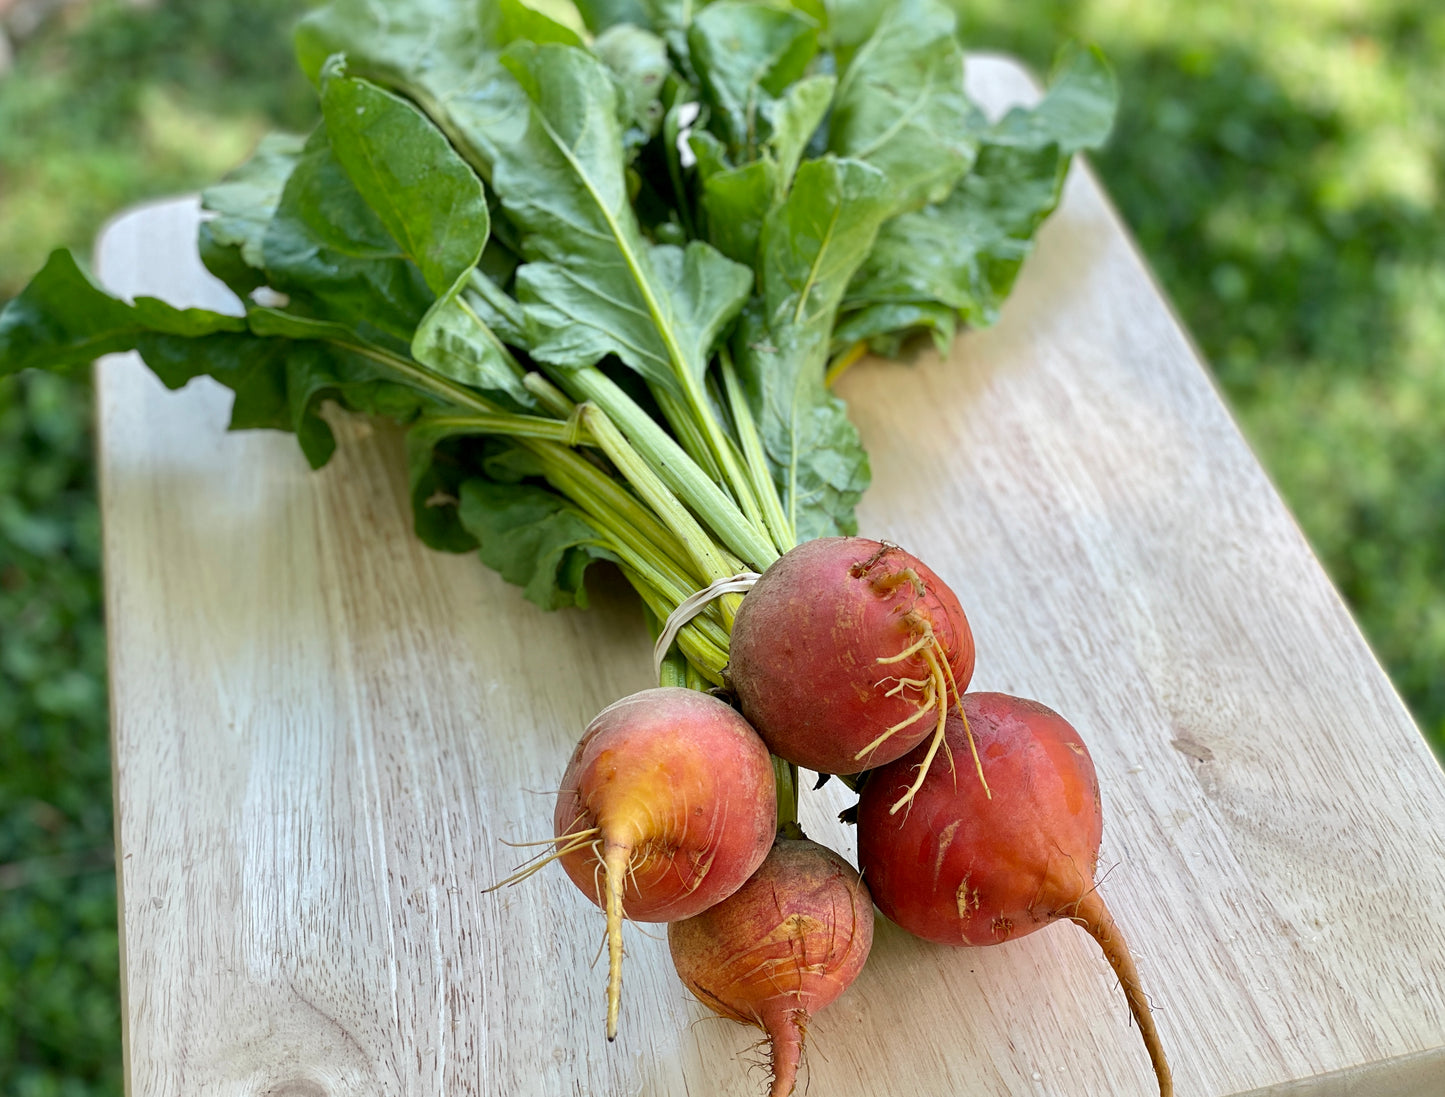 Beets - Red